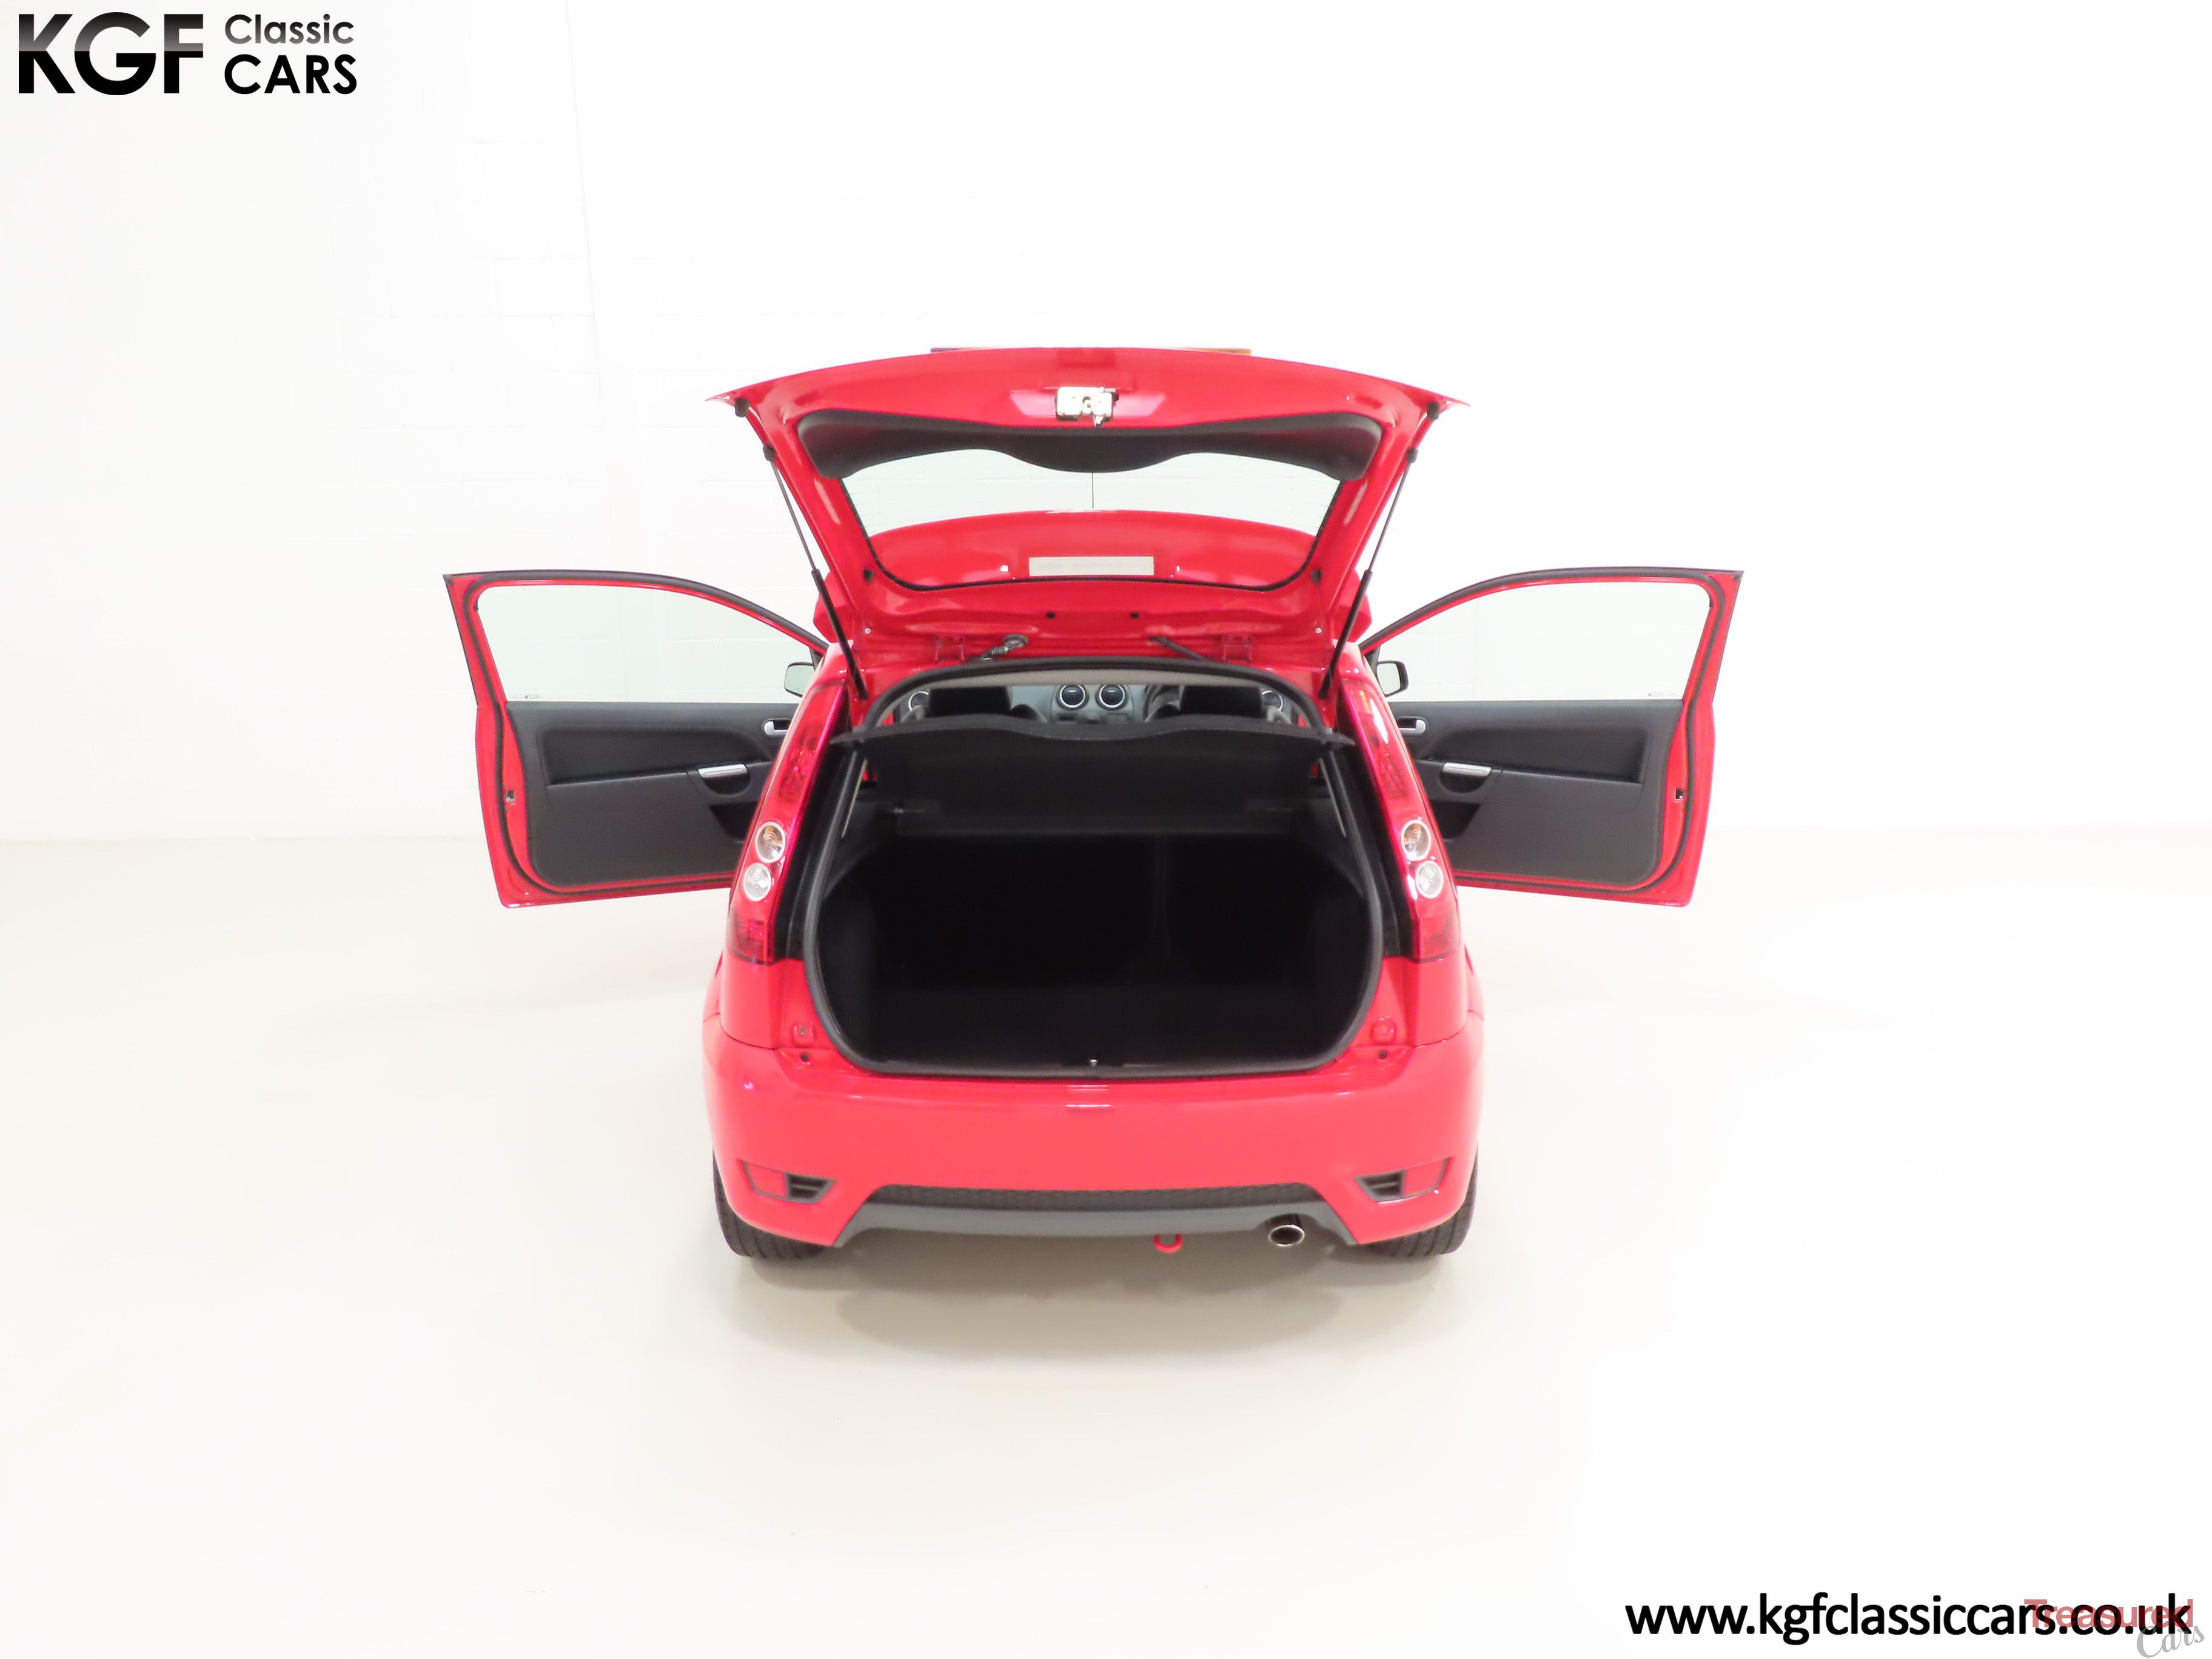 2006 Ford Fiesta Classic Cars for sale - Treasured Cars